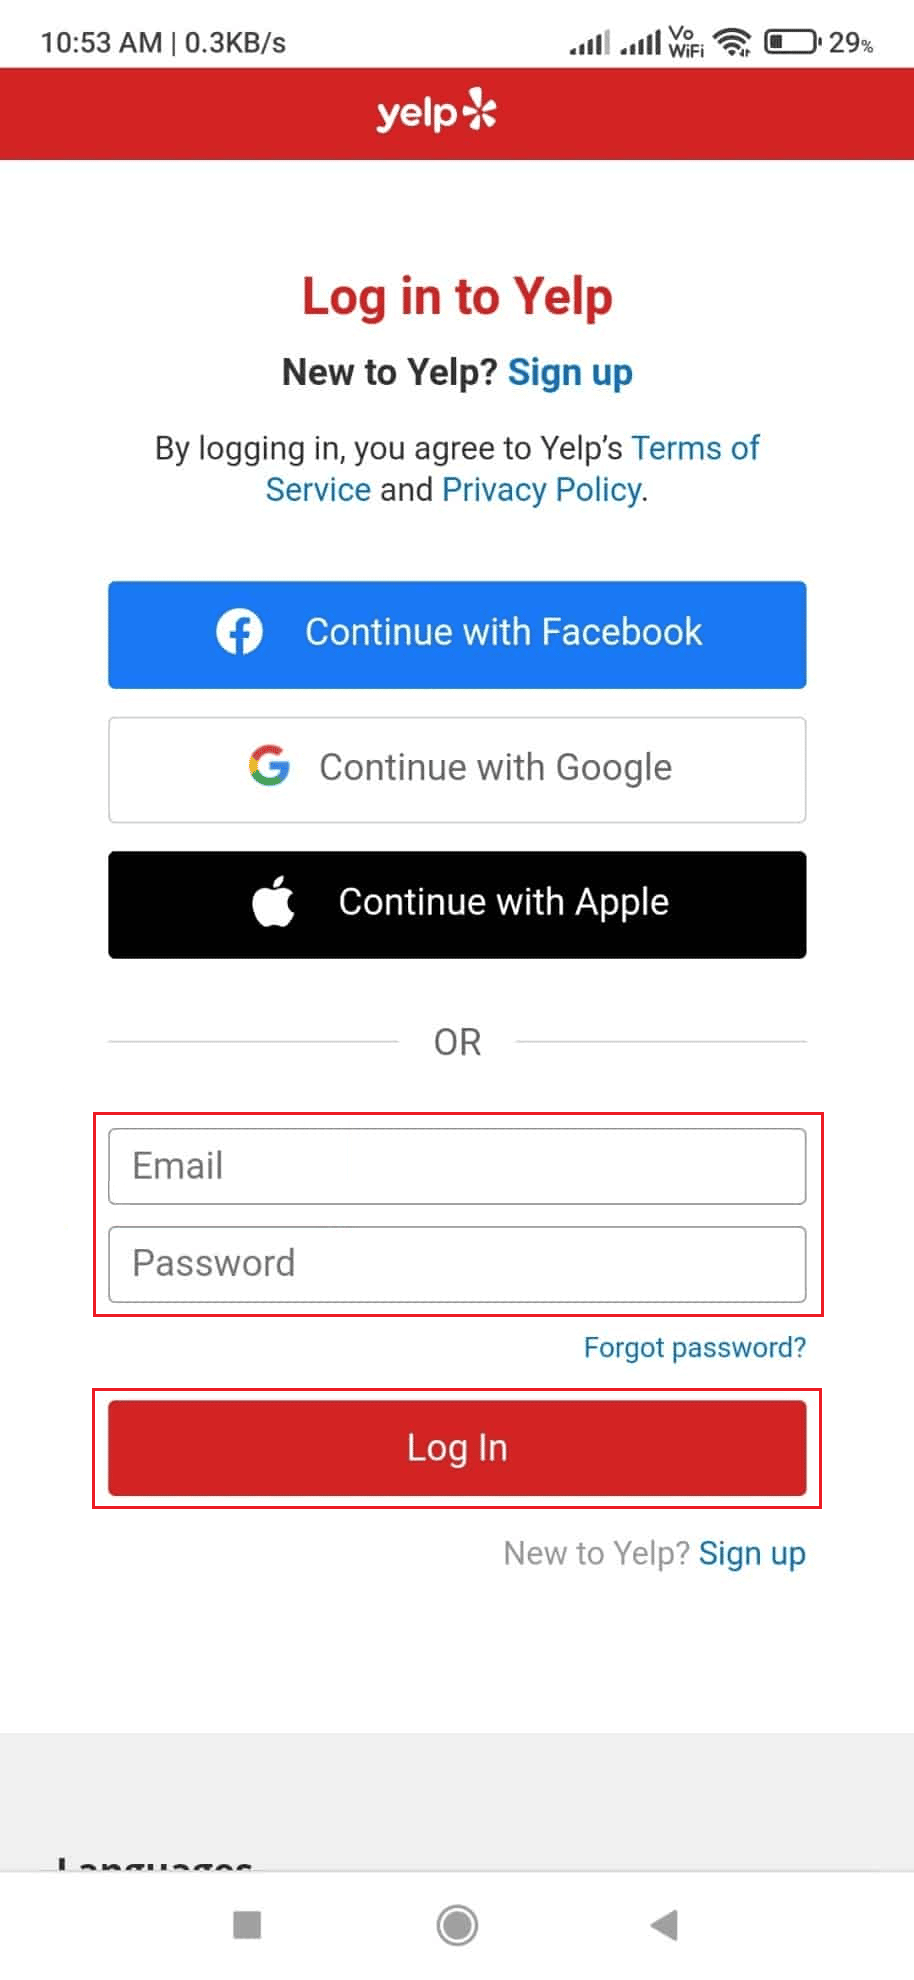 enter your registered email ID and password - Log In